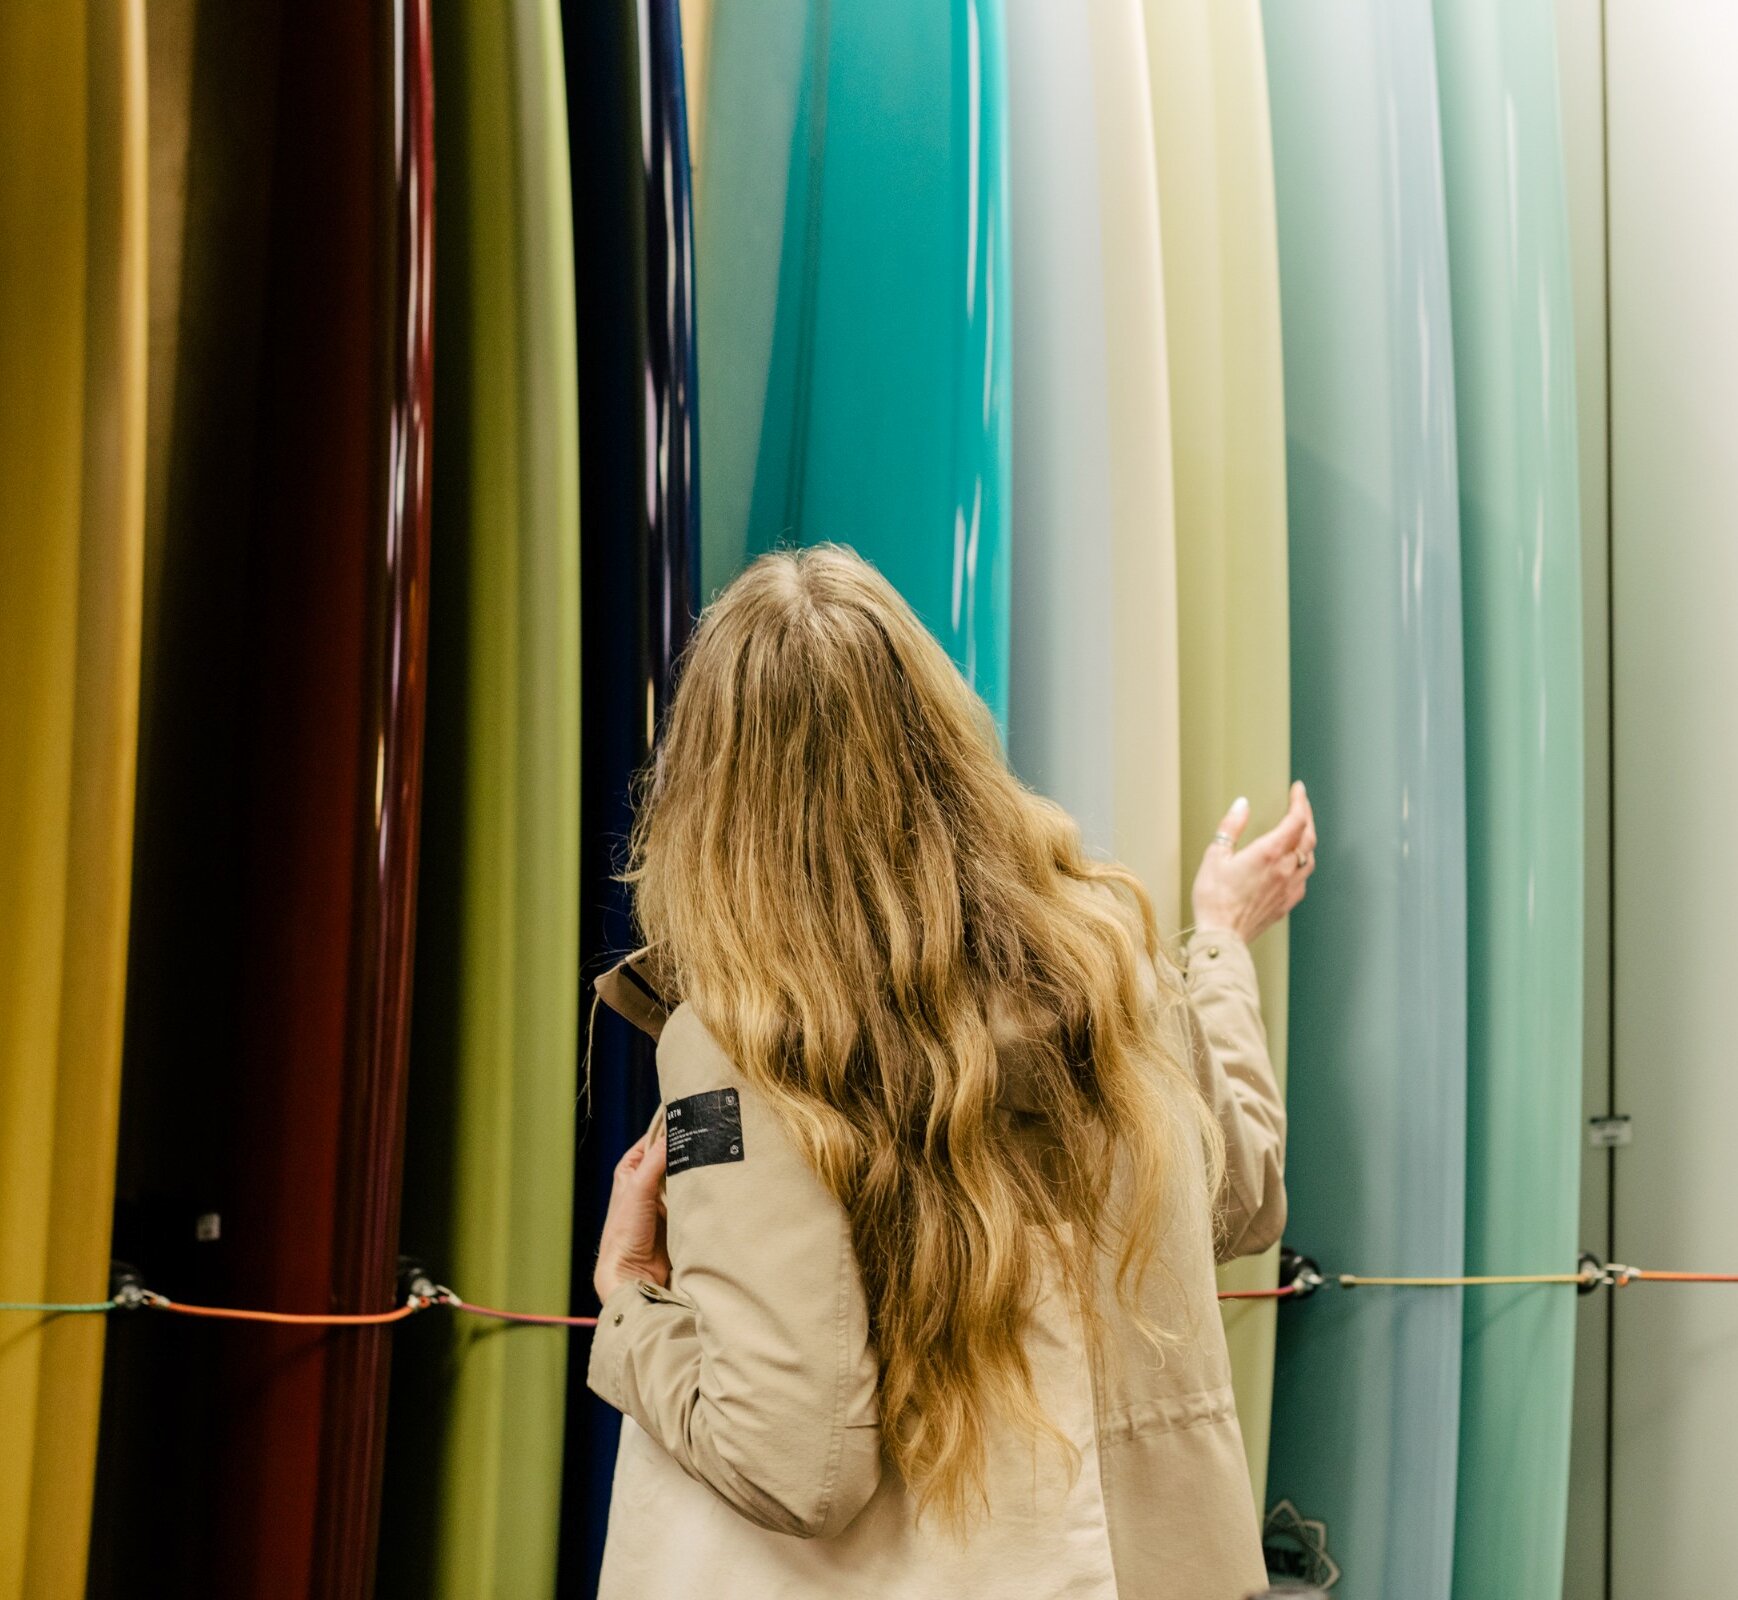 Woman with long hair looking at a display of colourful surfboards